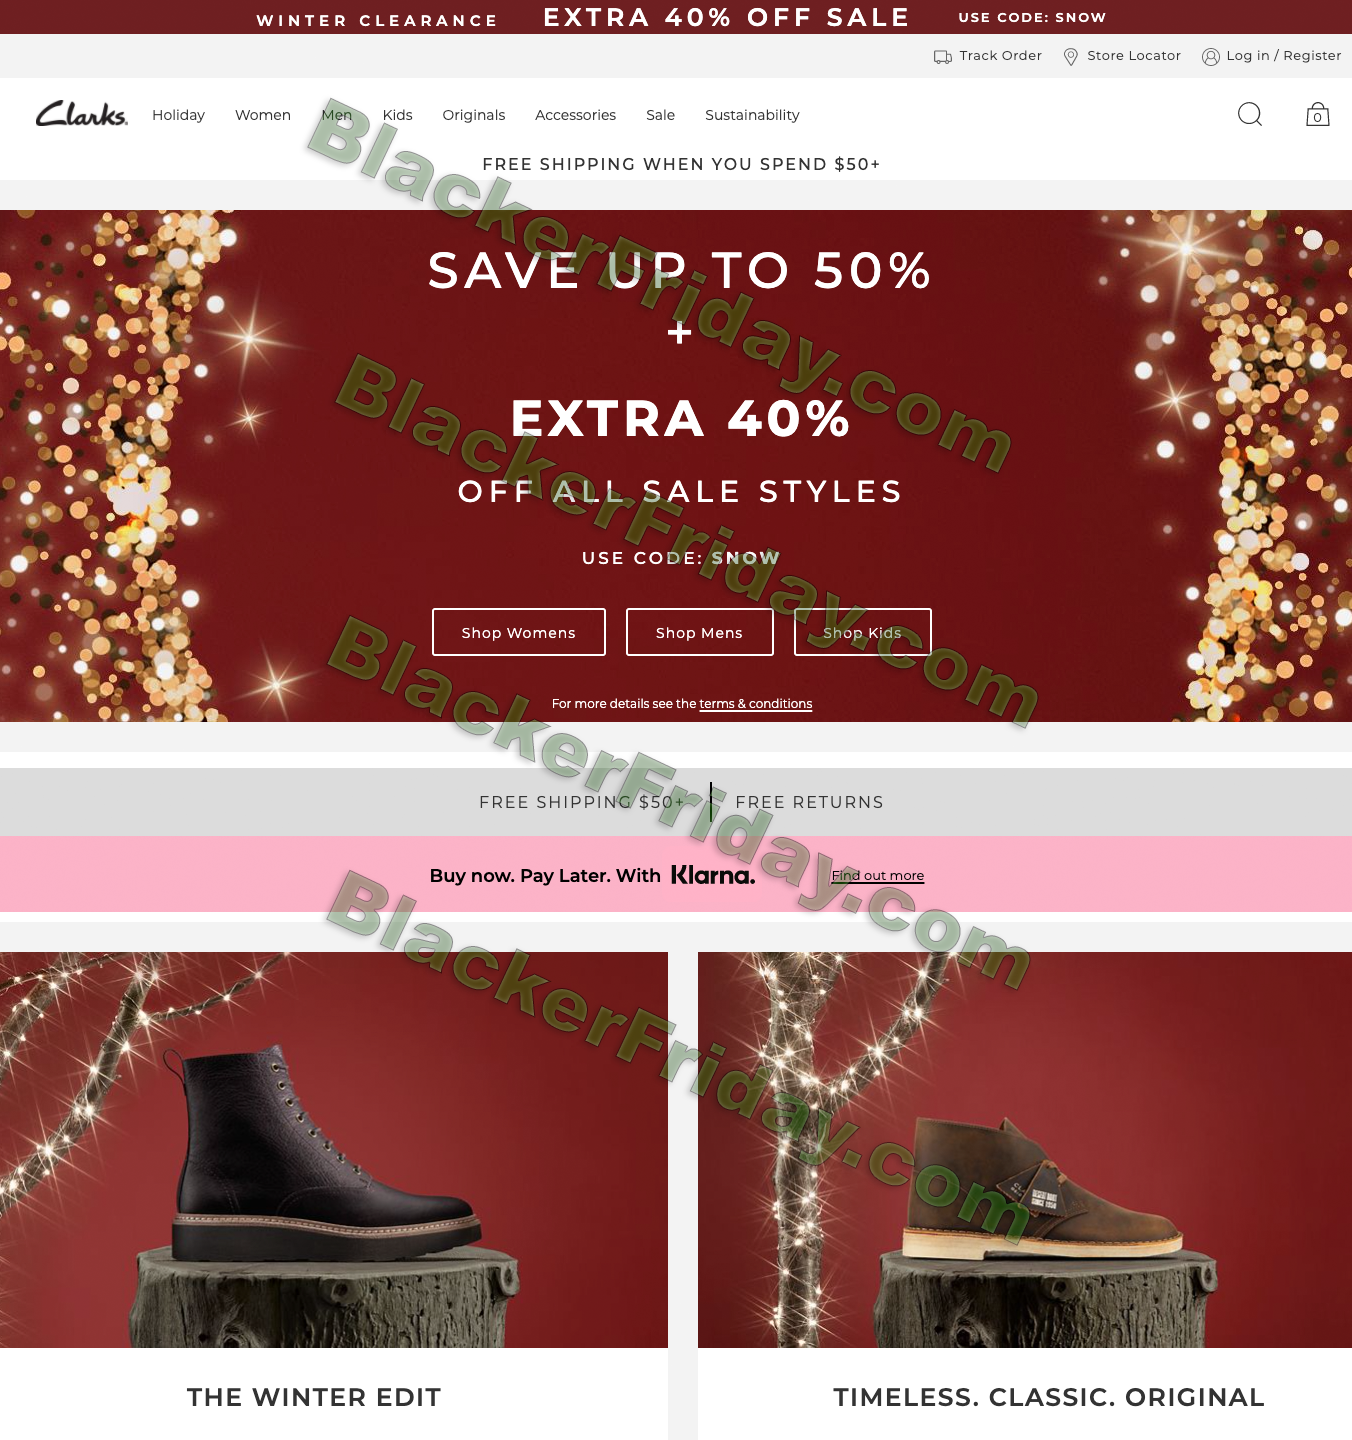 clarks boxing day sale